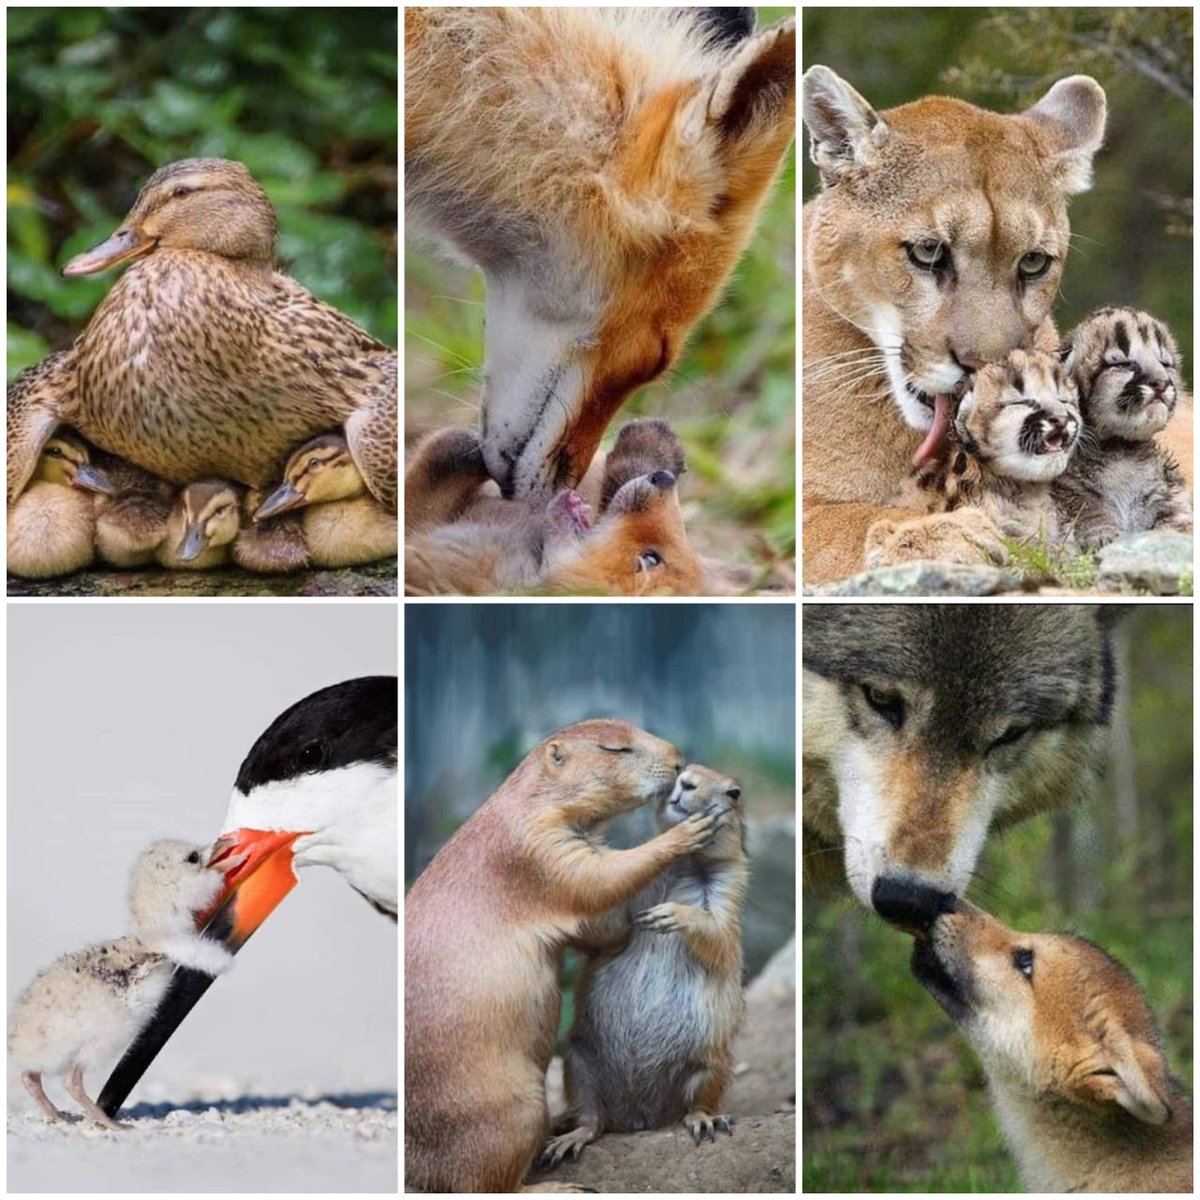 This tribute pays homage to forgotten #mothers, highlighting their unconditional love and care for their offspring. Let's strive to create a compassionate world for all Mothers and their beloved babies, both Human and #Animal !! Happy #MothersDay 💕 #Voiceless